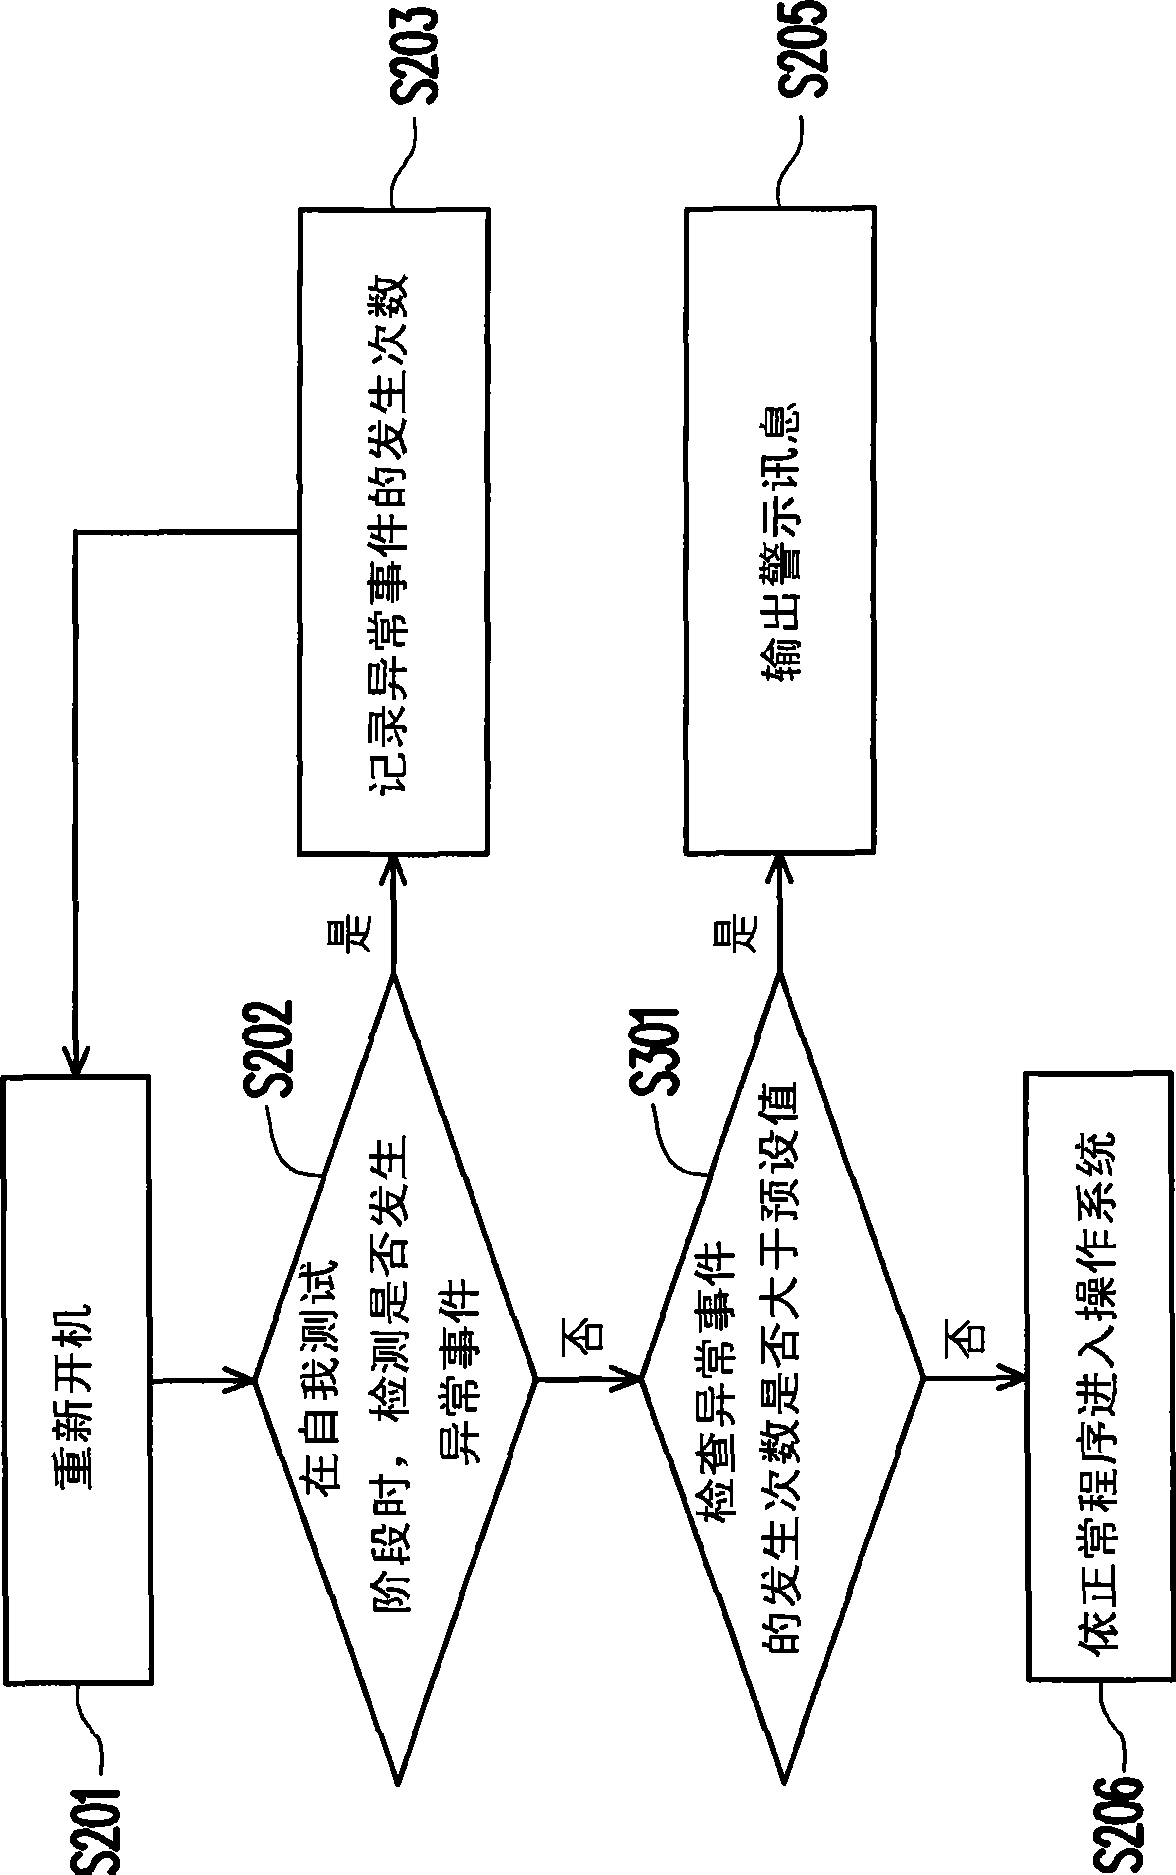 Evaluation method for main unit and its status